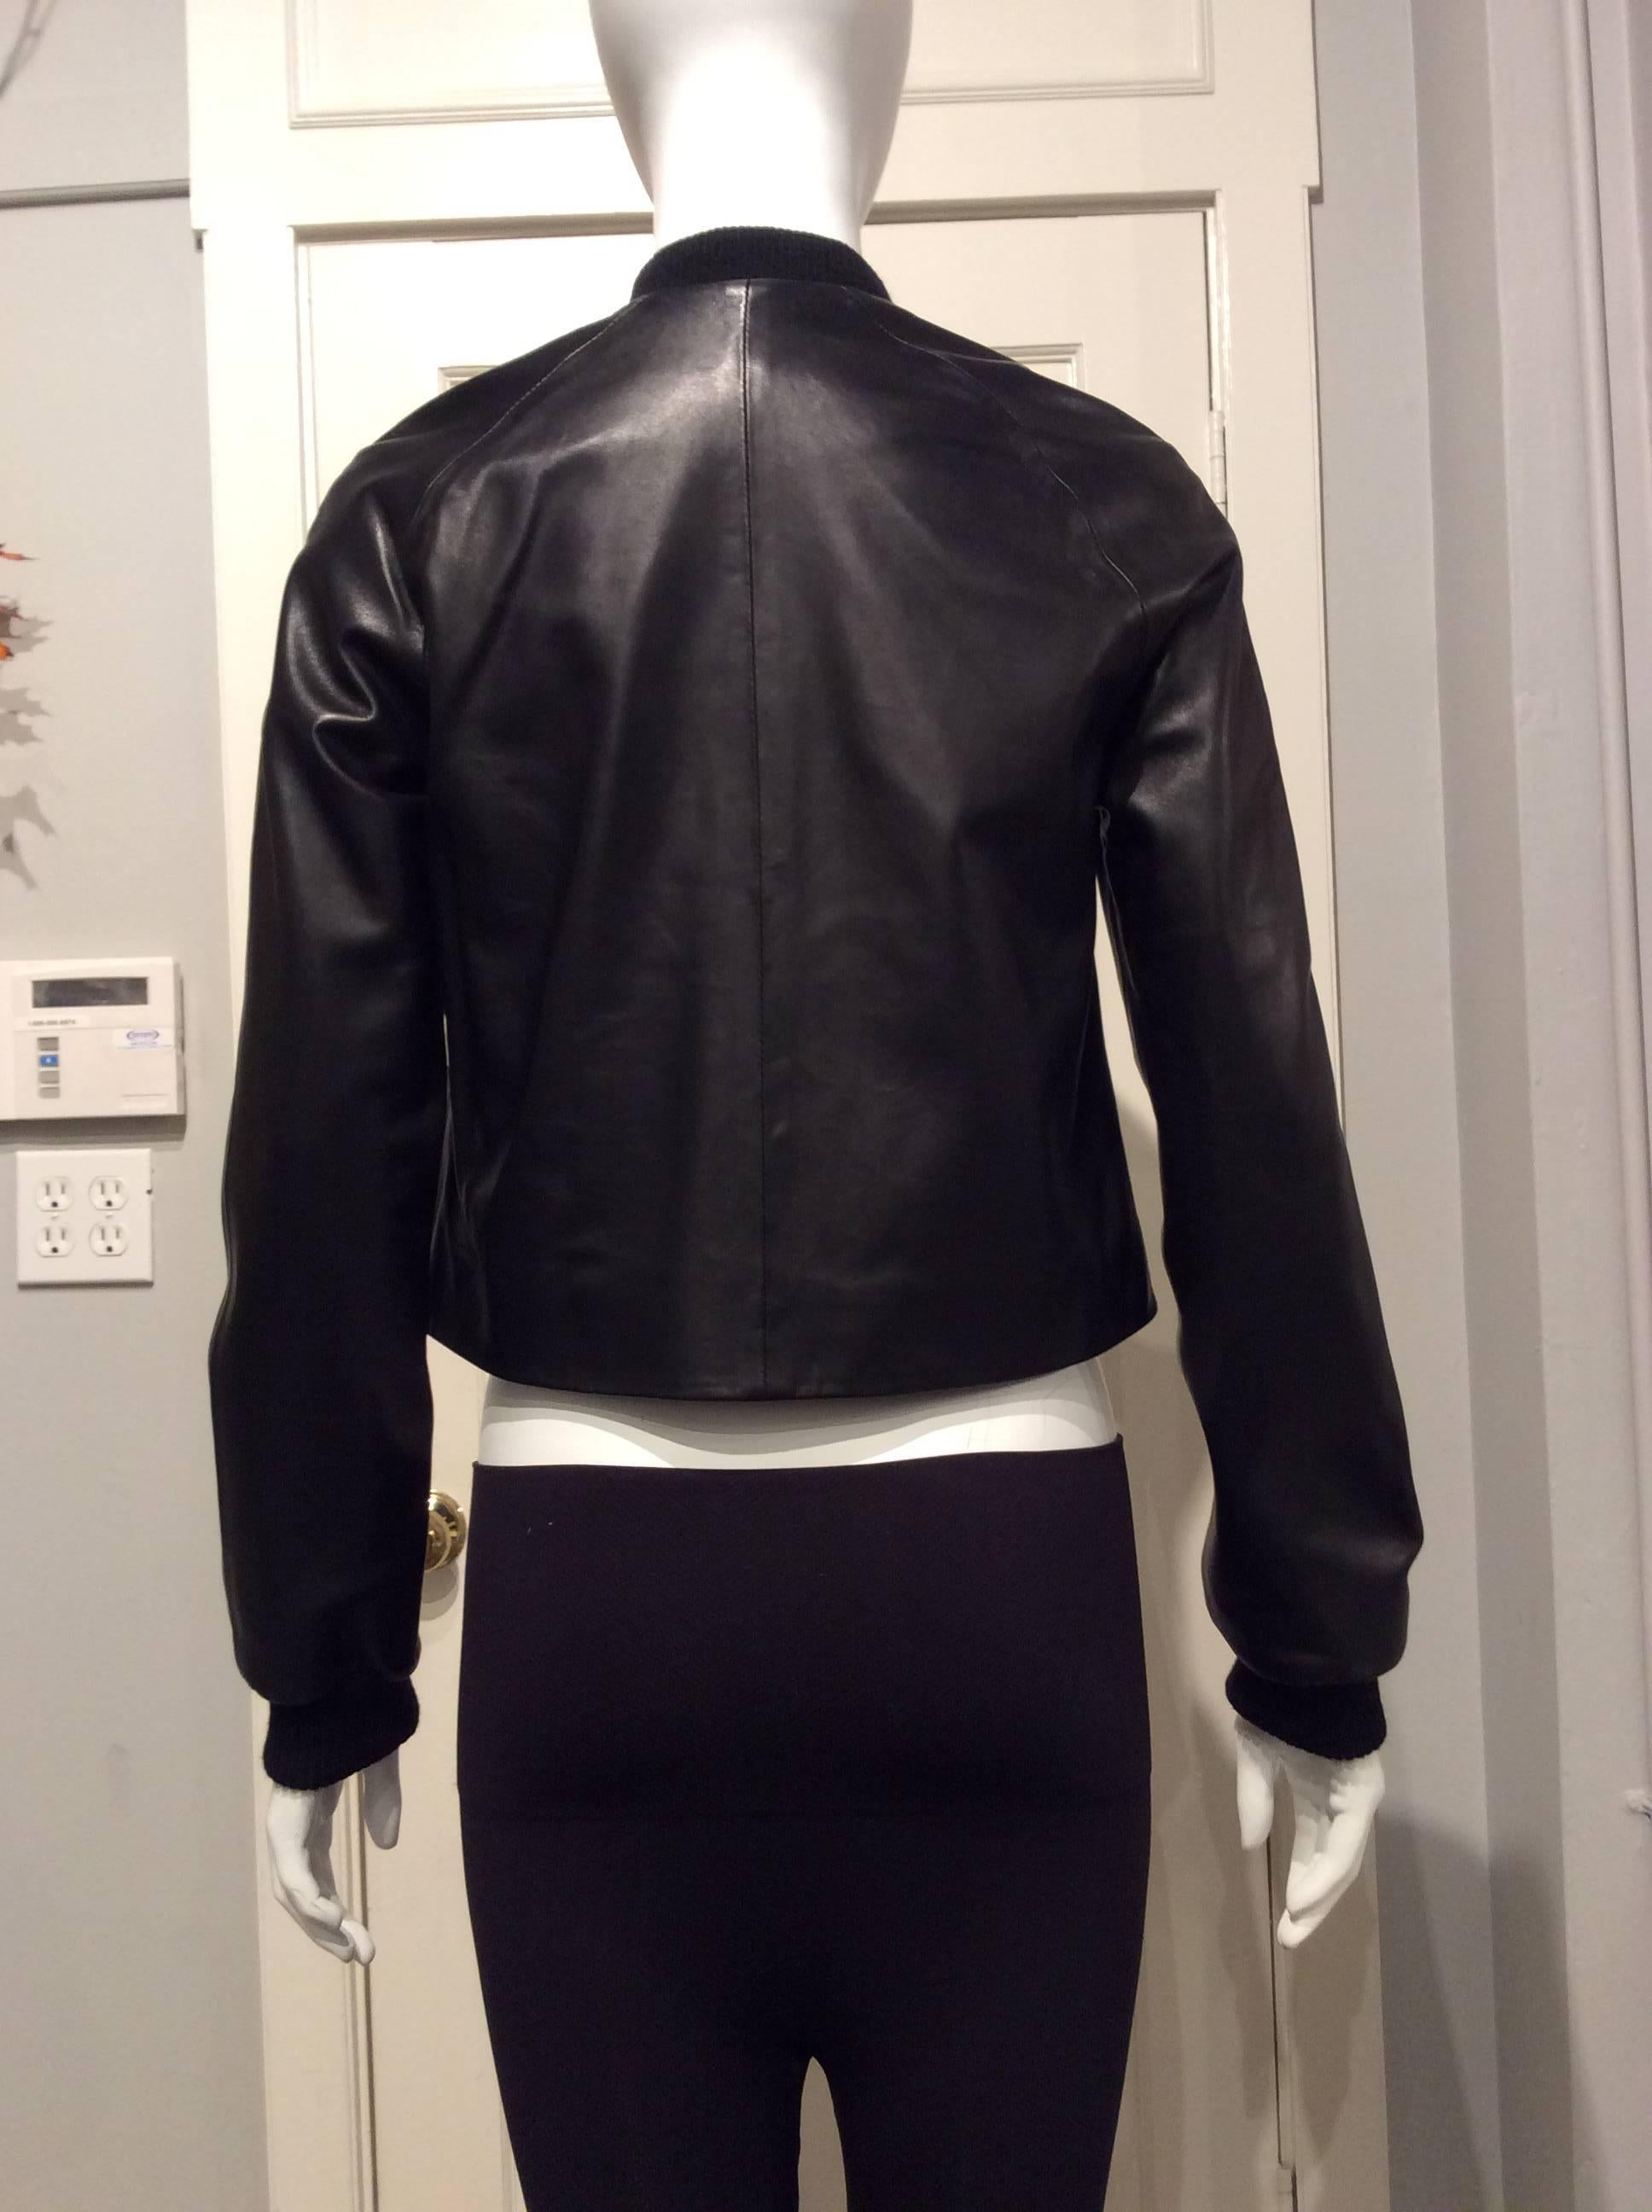 Christopher Kane Black Leather Bomber Jacket  UK Sz6 (US 2) In New Condition For Sale In San Francisco, CA